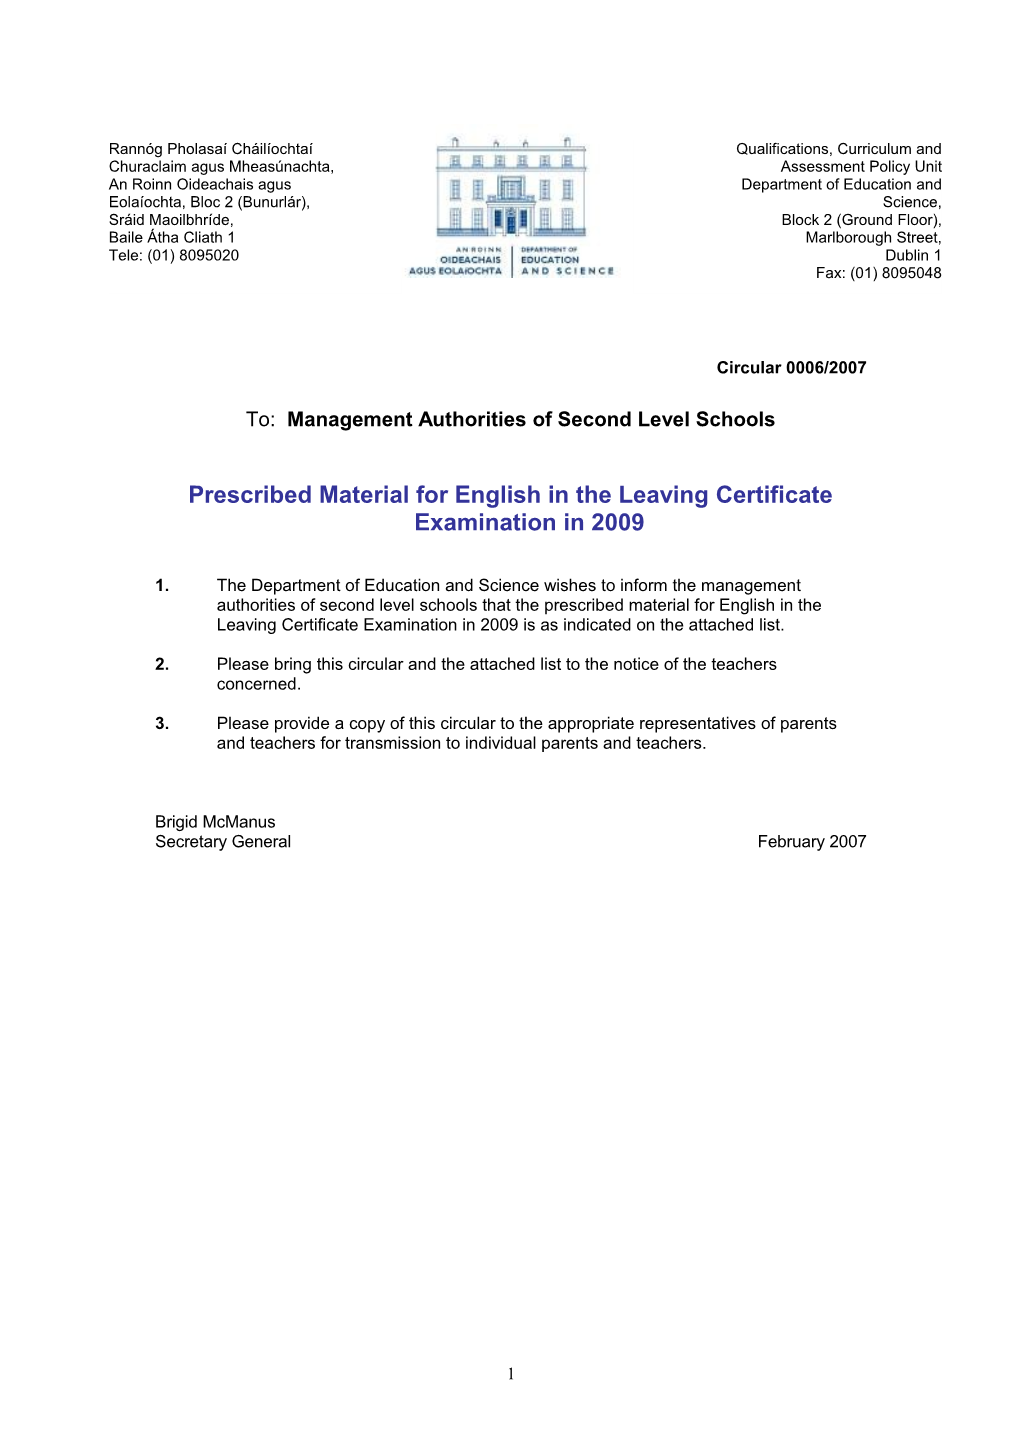 Circular 0006/2007 - Prescribed Material for English in the Leaving Certificate Examination